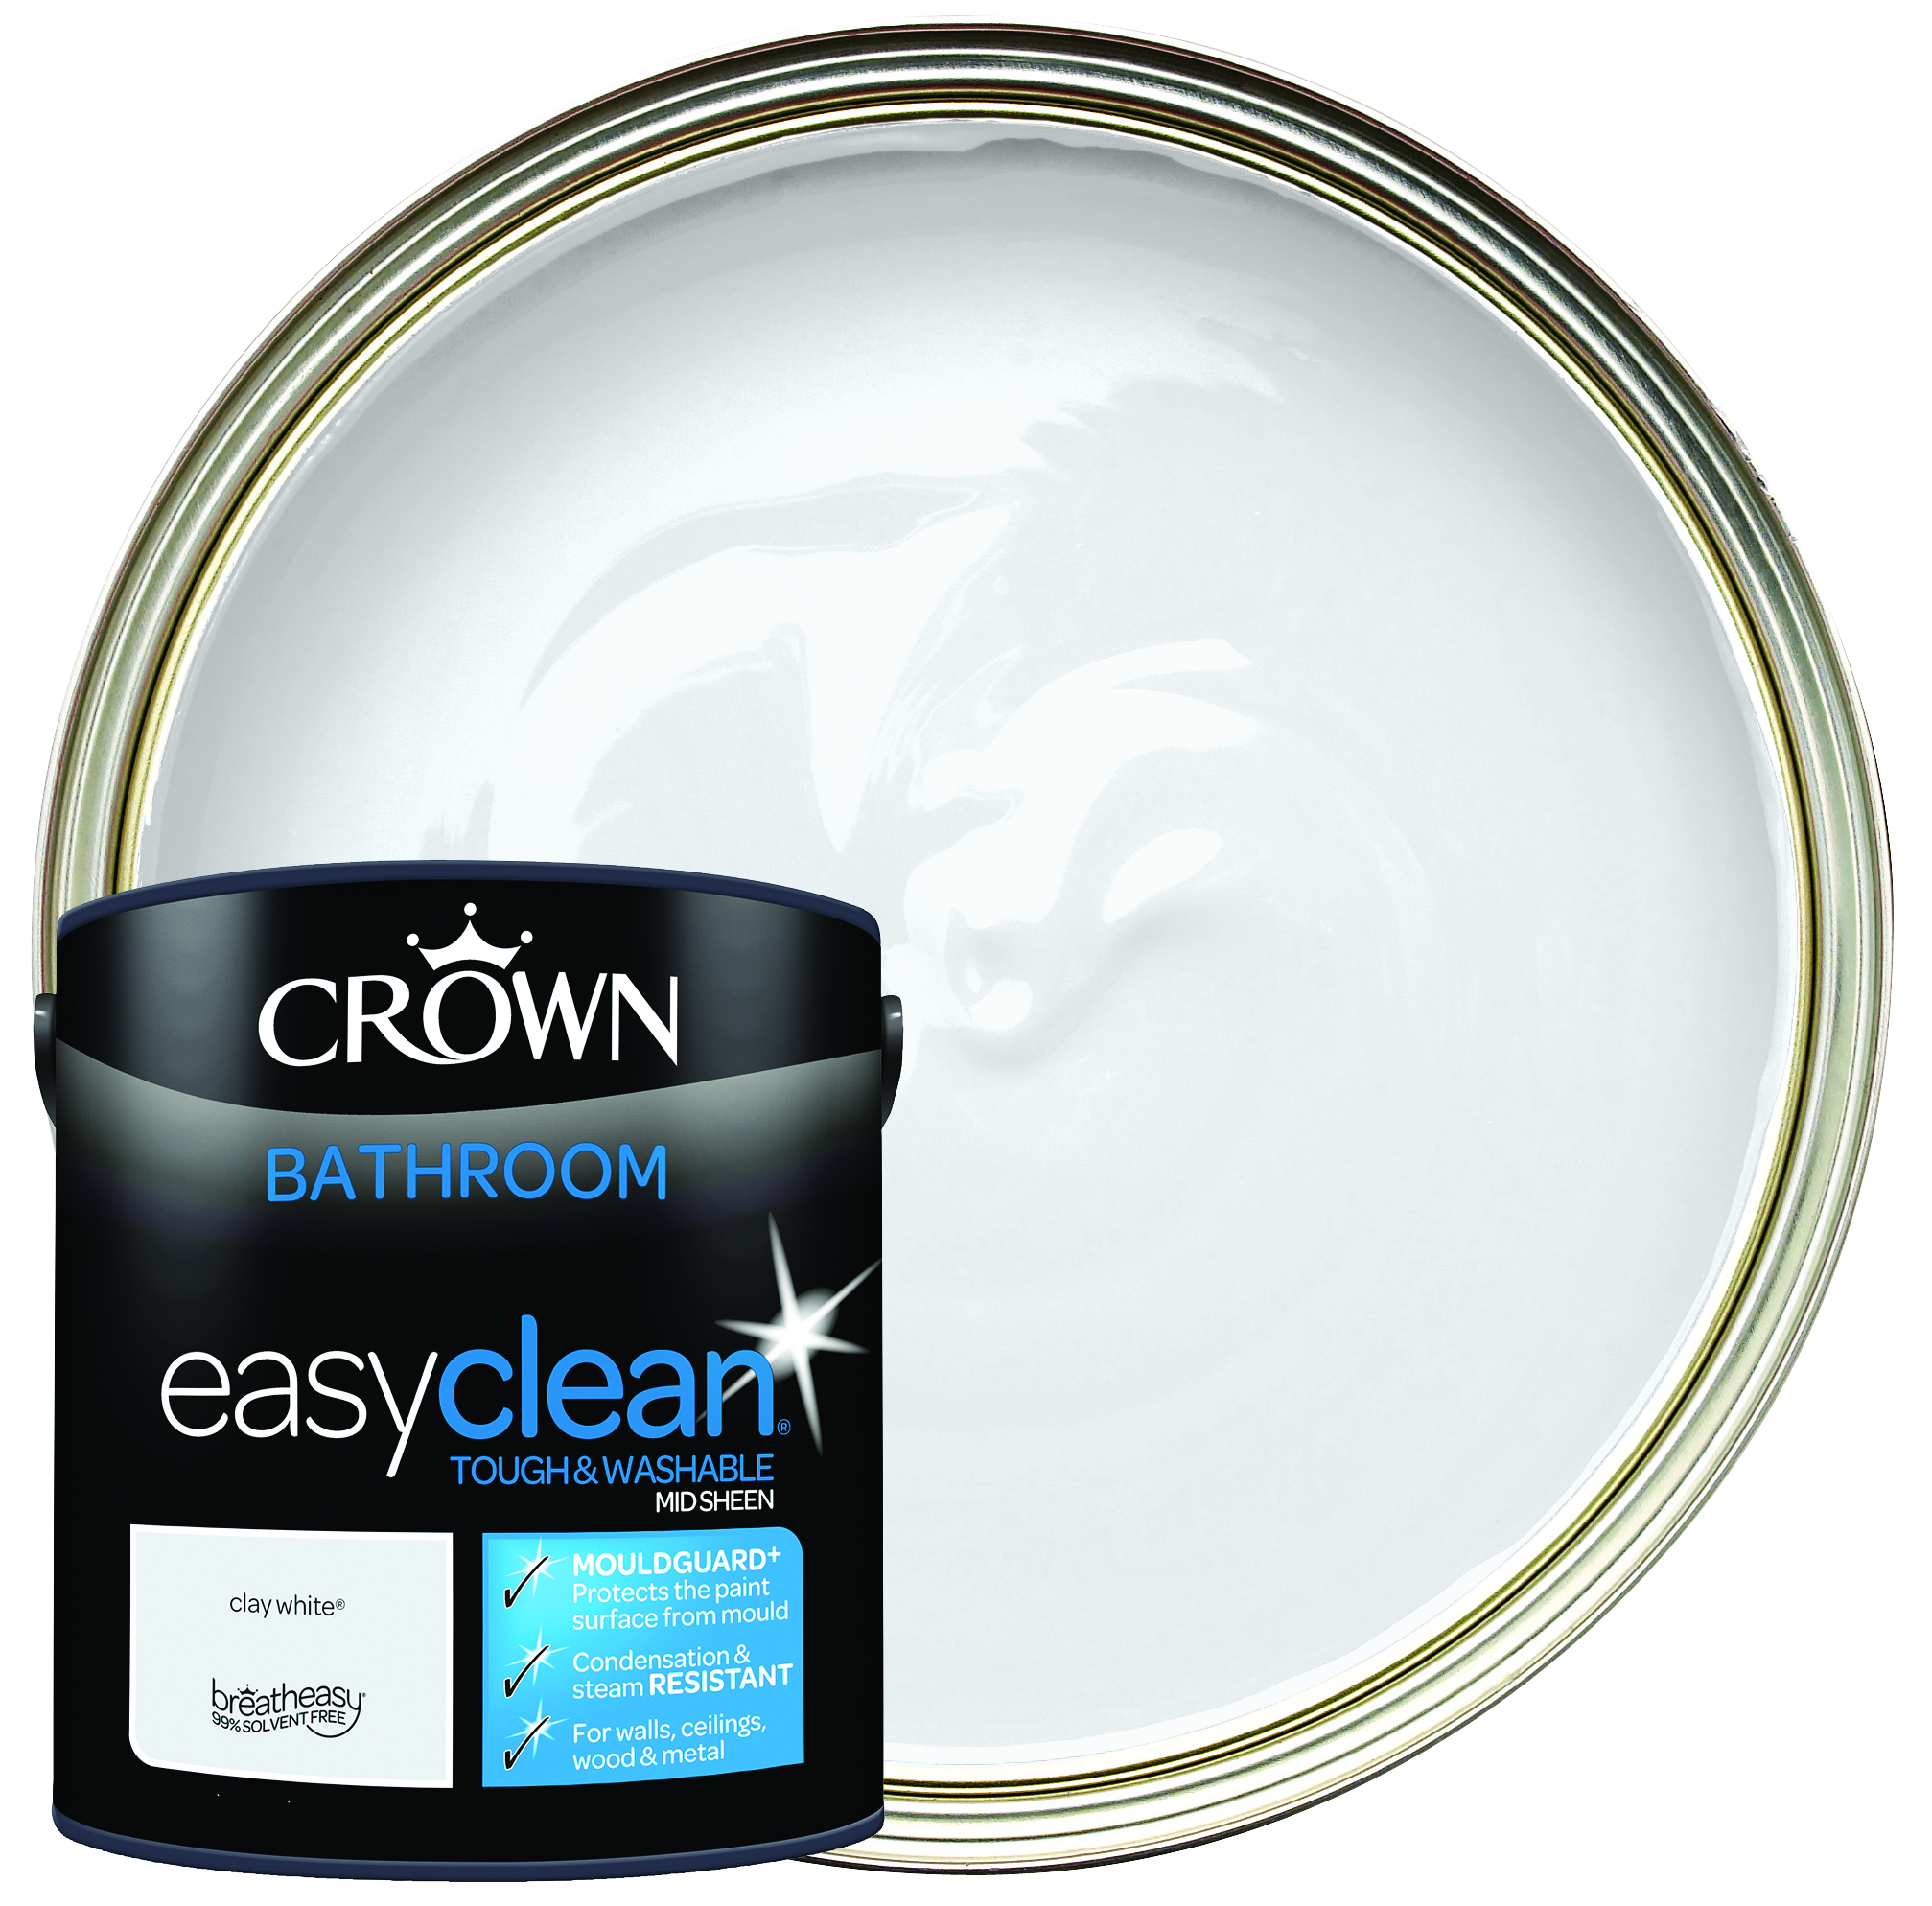 Image of Crown Easyclean Mid Sheen Emulsion Bathroom Paint - Clay White - 2.5L